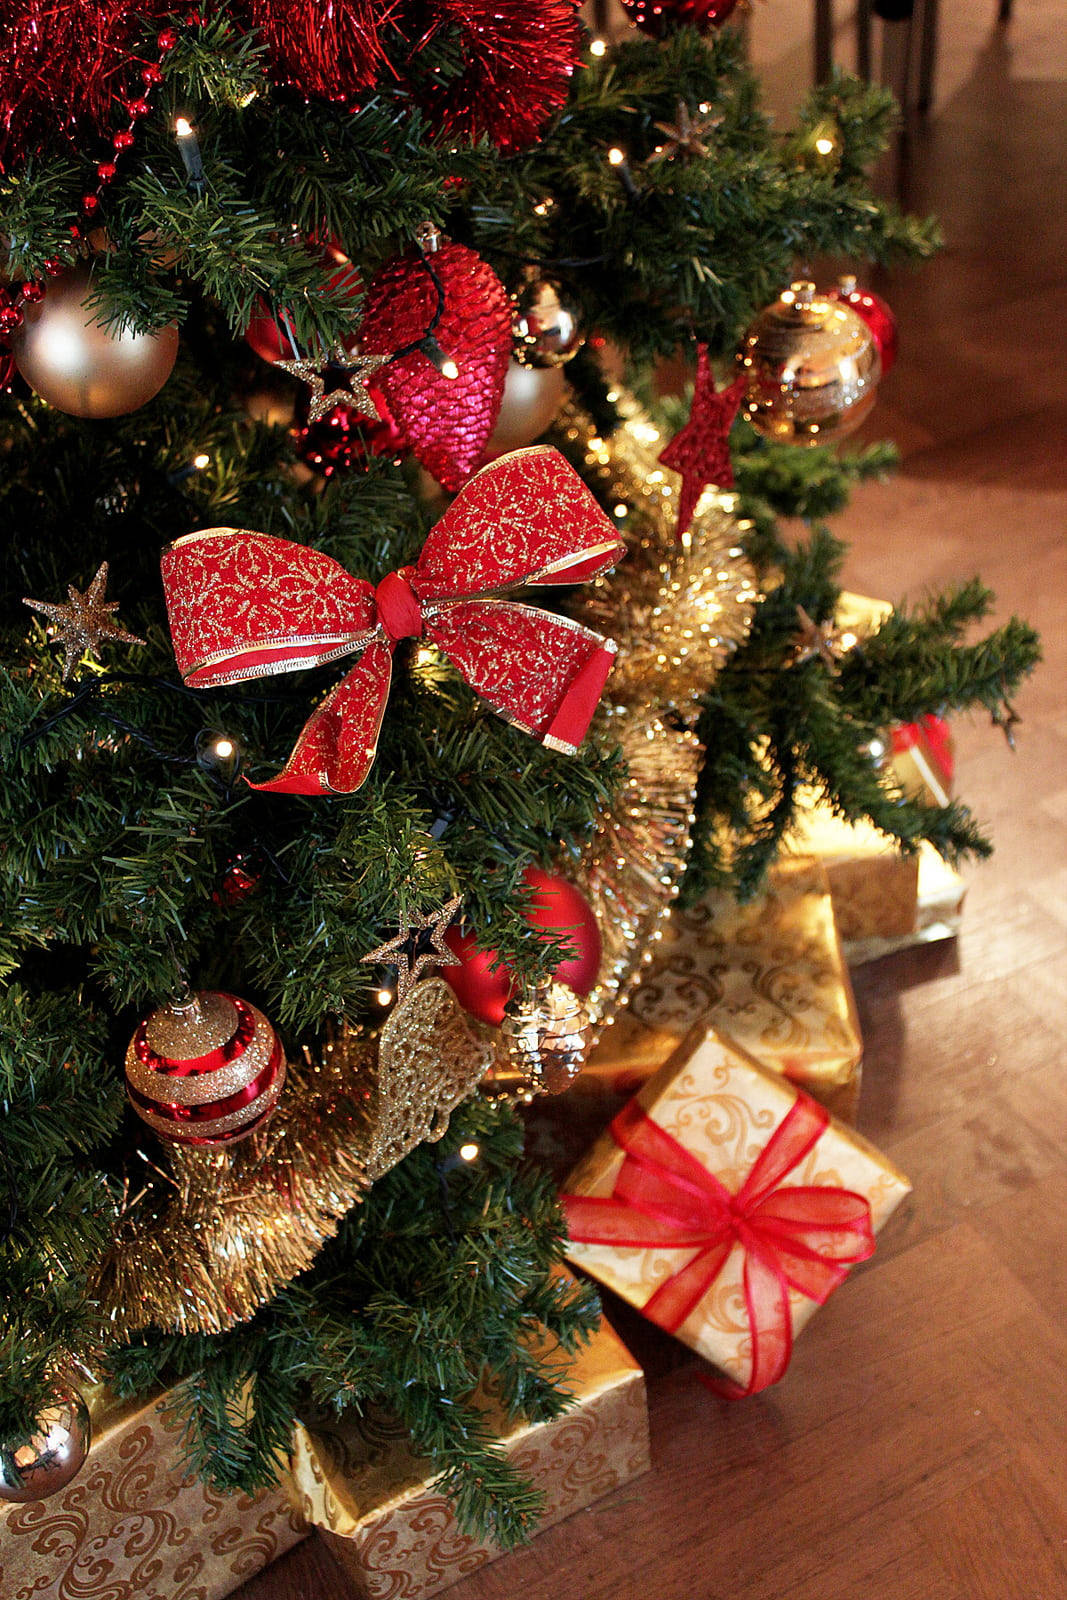 Beautiful Christmas Gifts Under The Tree